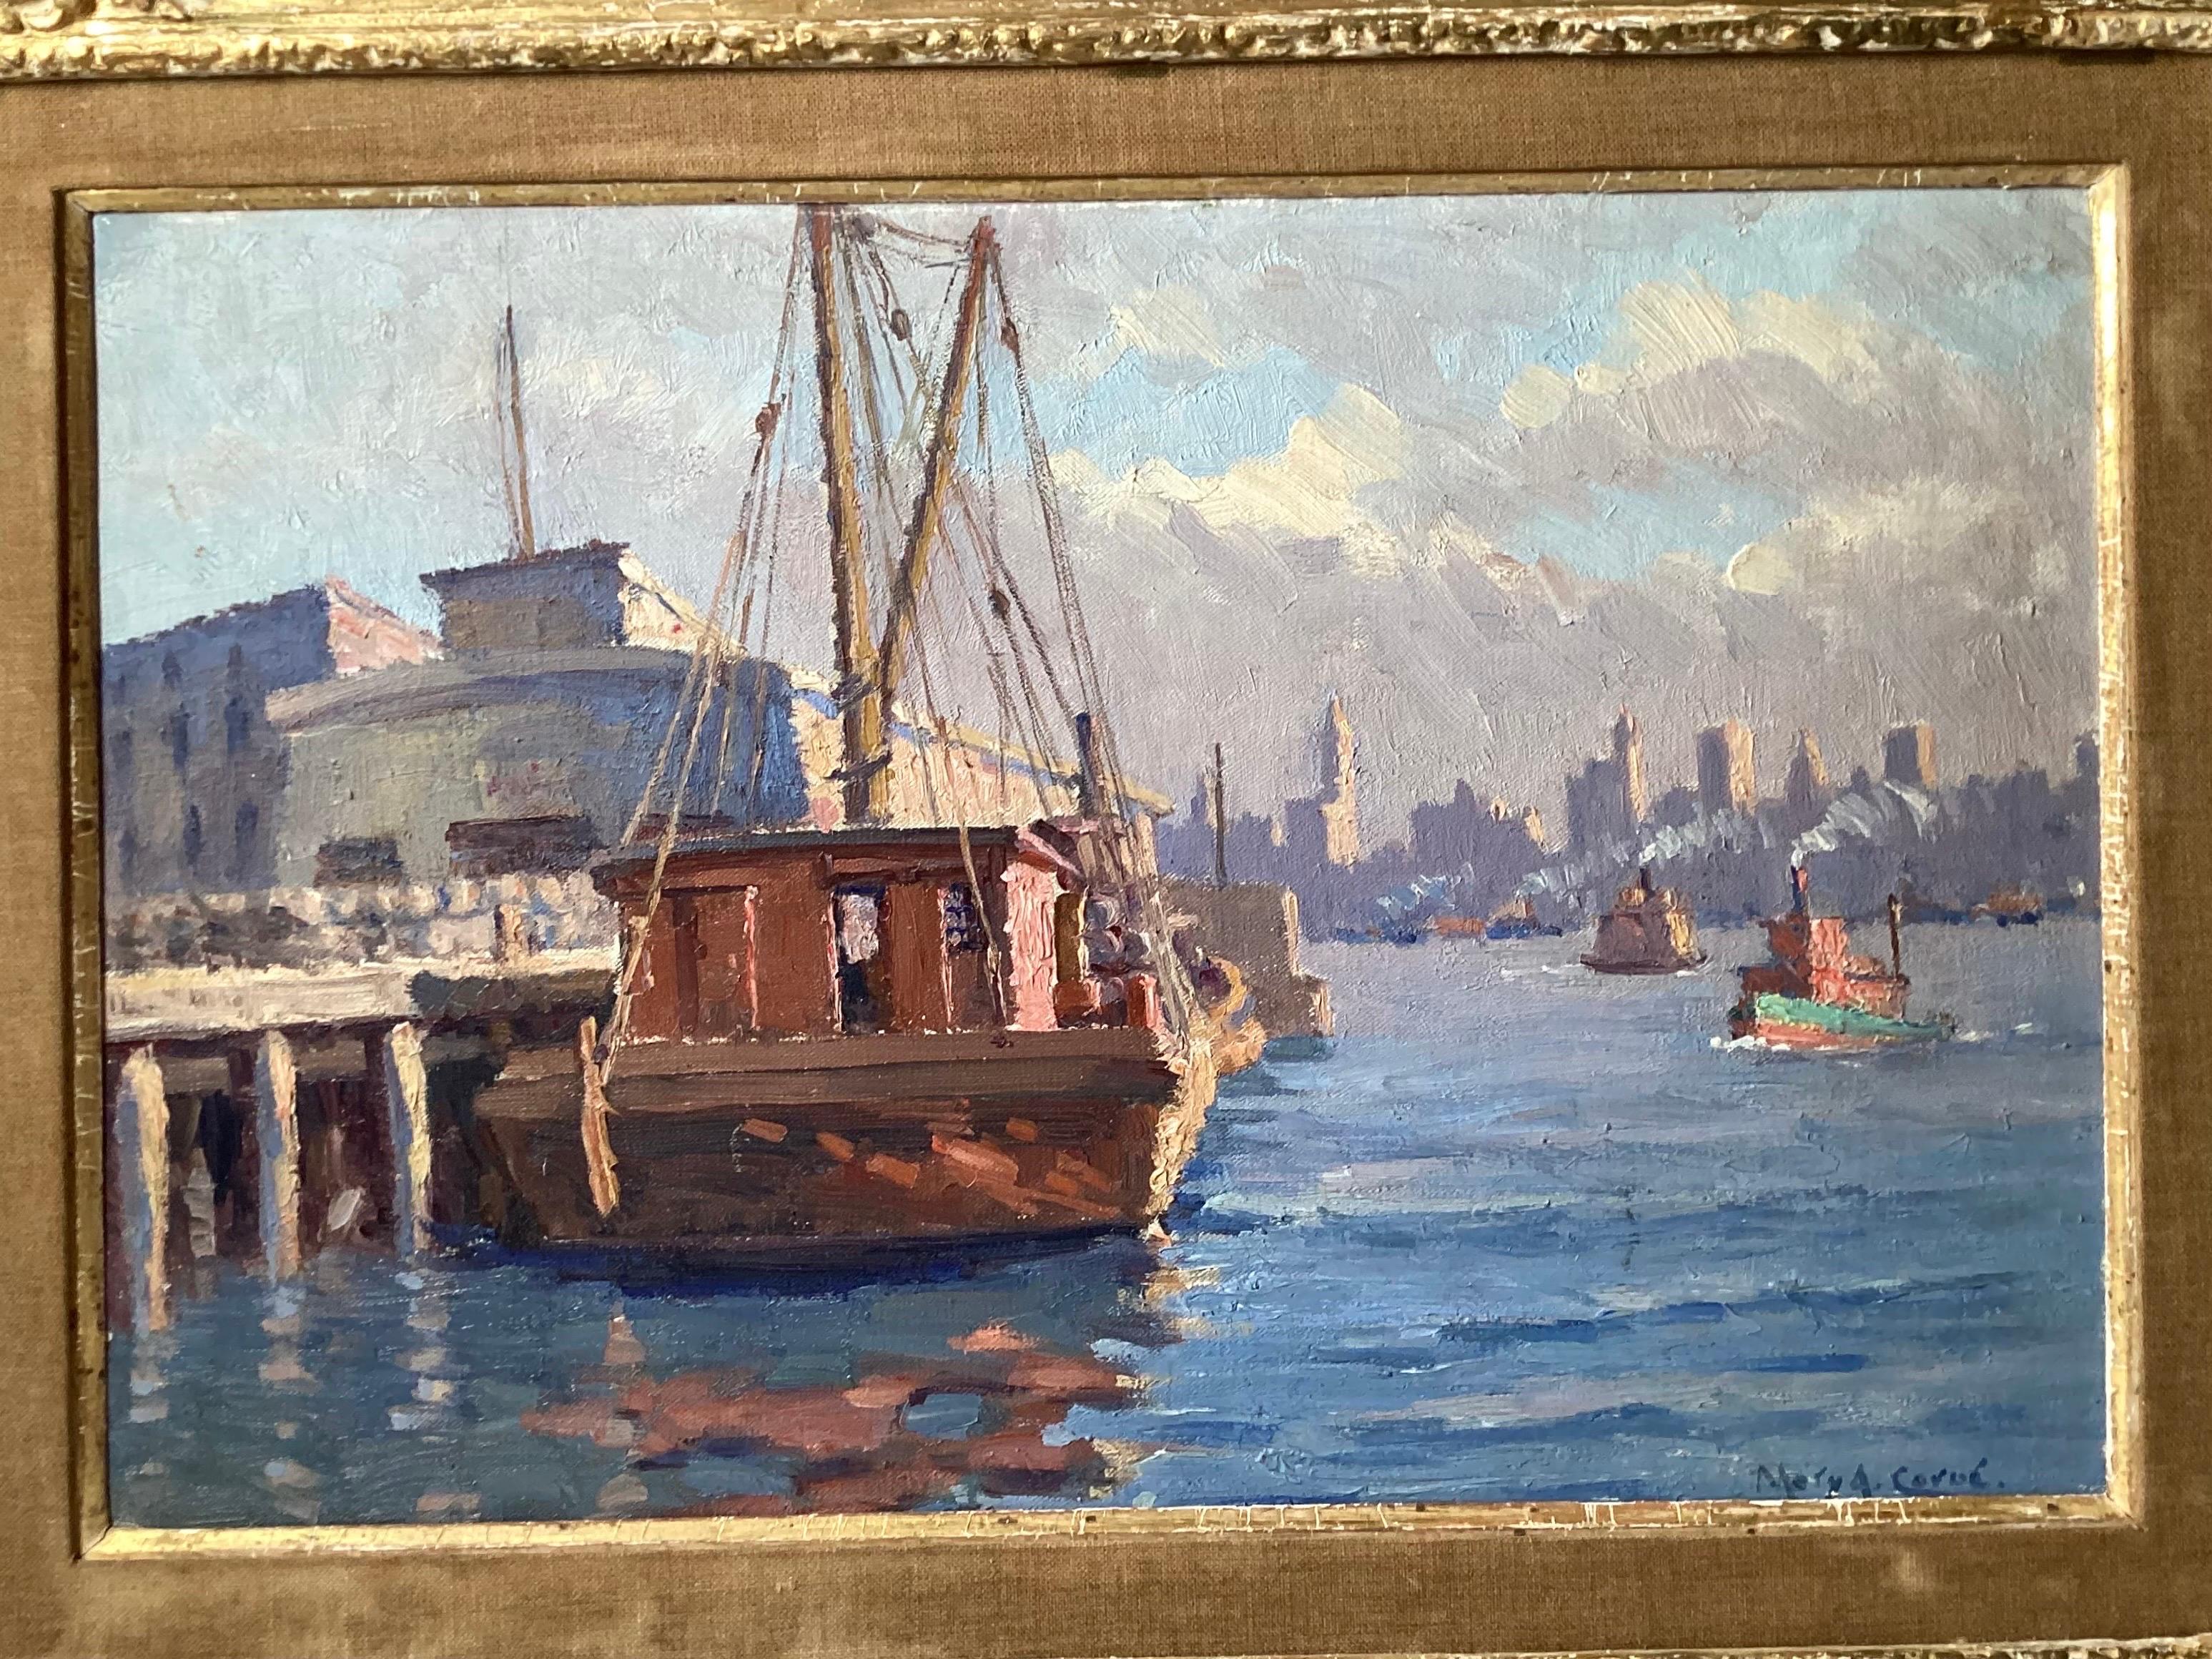 An mid 20th century impressionist style oil boar of a harbor scene. The painting in original weather gilt surface frame. The painting is artist signed in blue, somewhat illegible, last name is Carol. the painting framed measures 24 inches wide 18